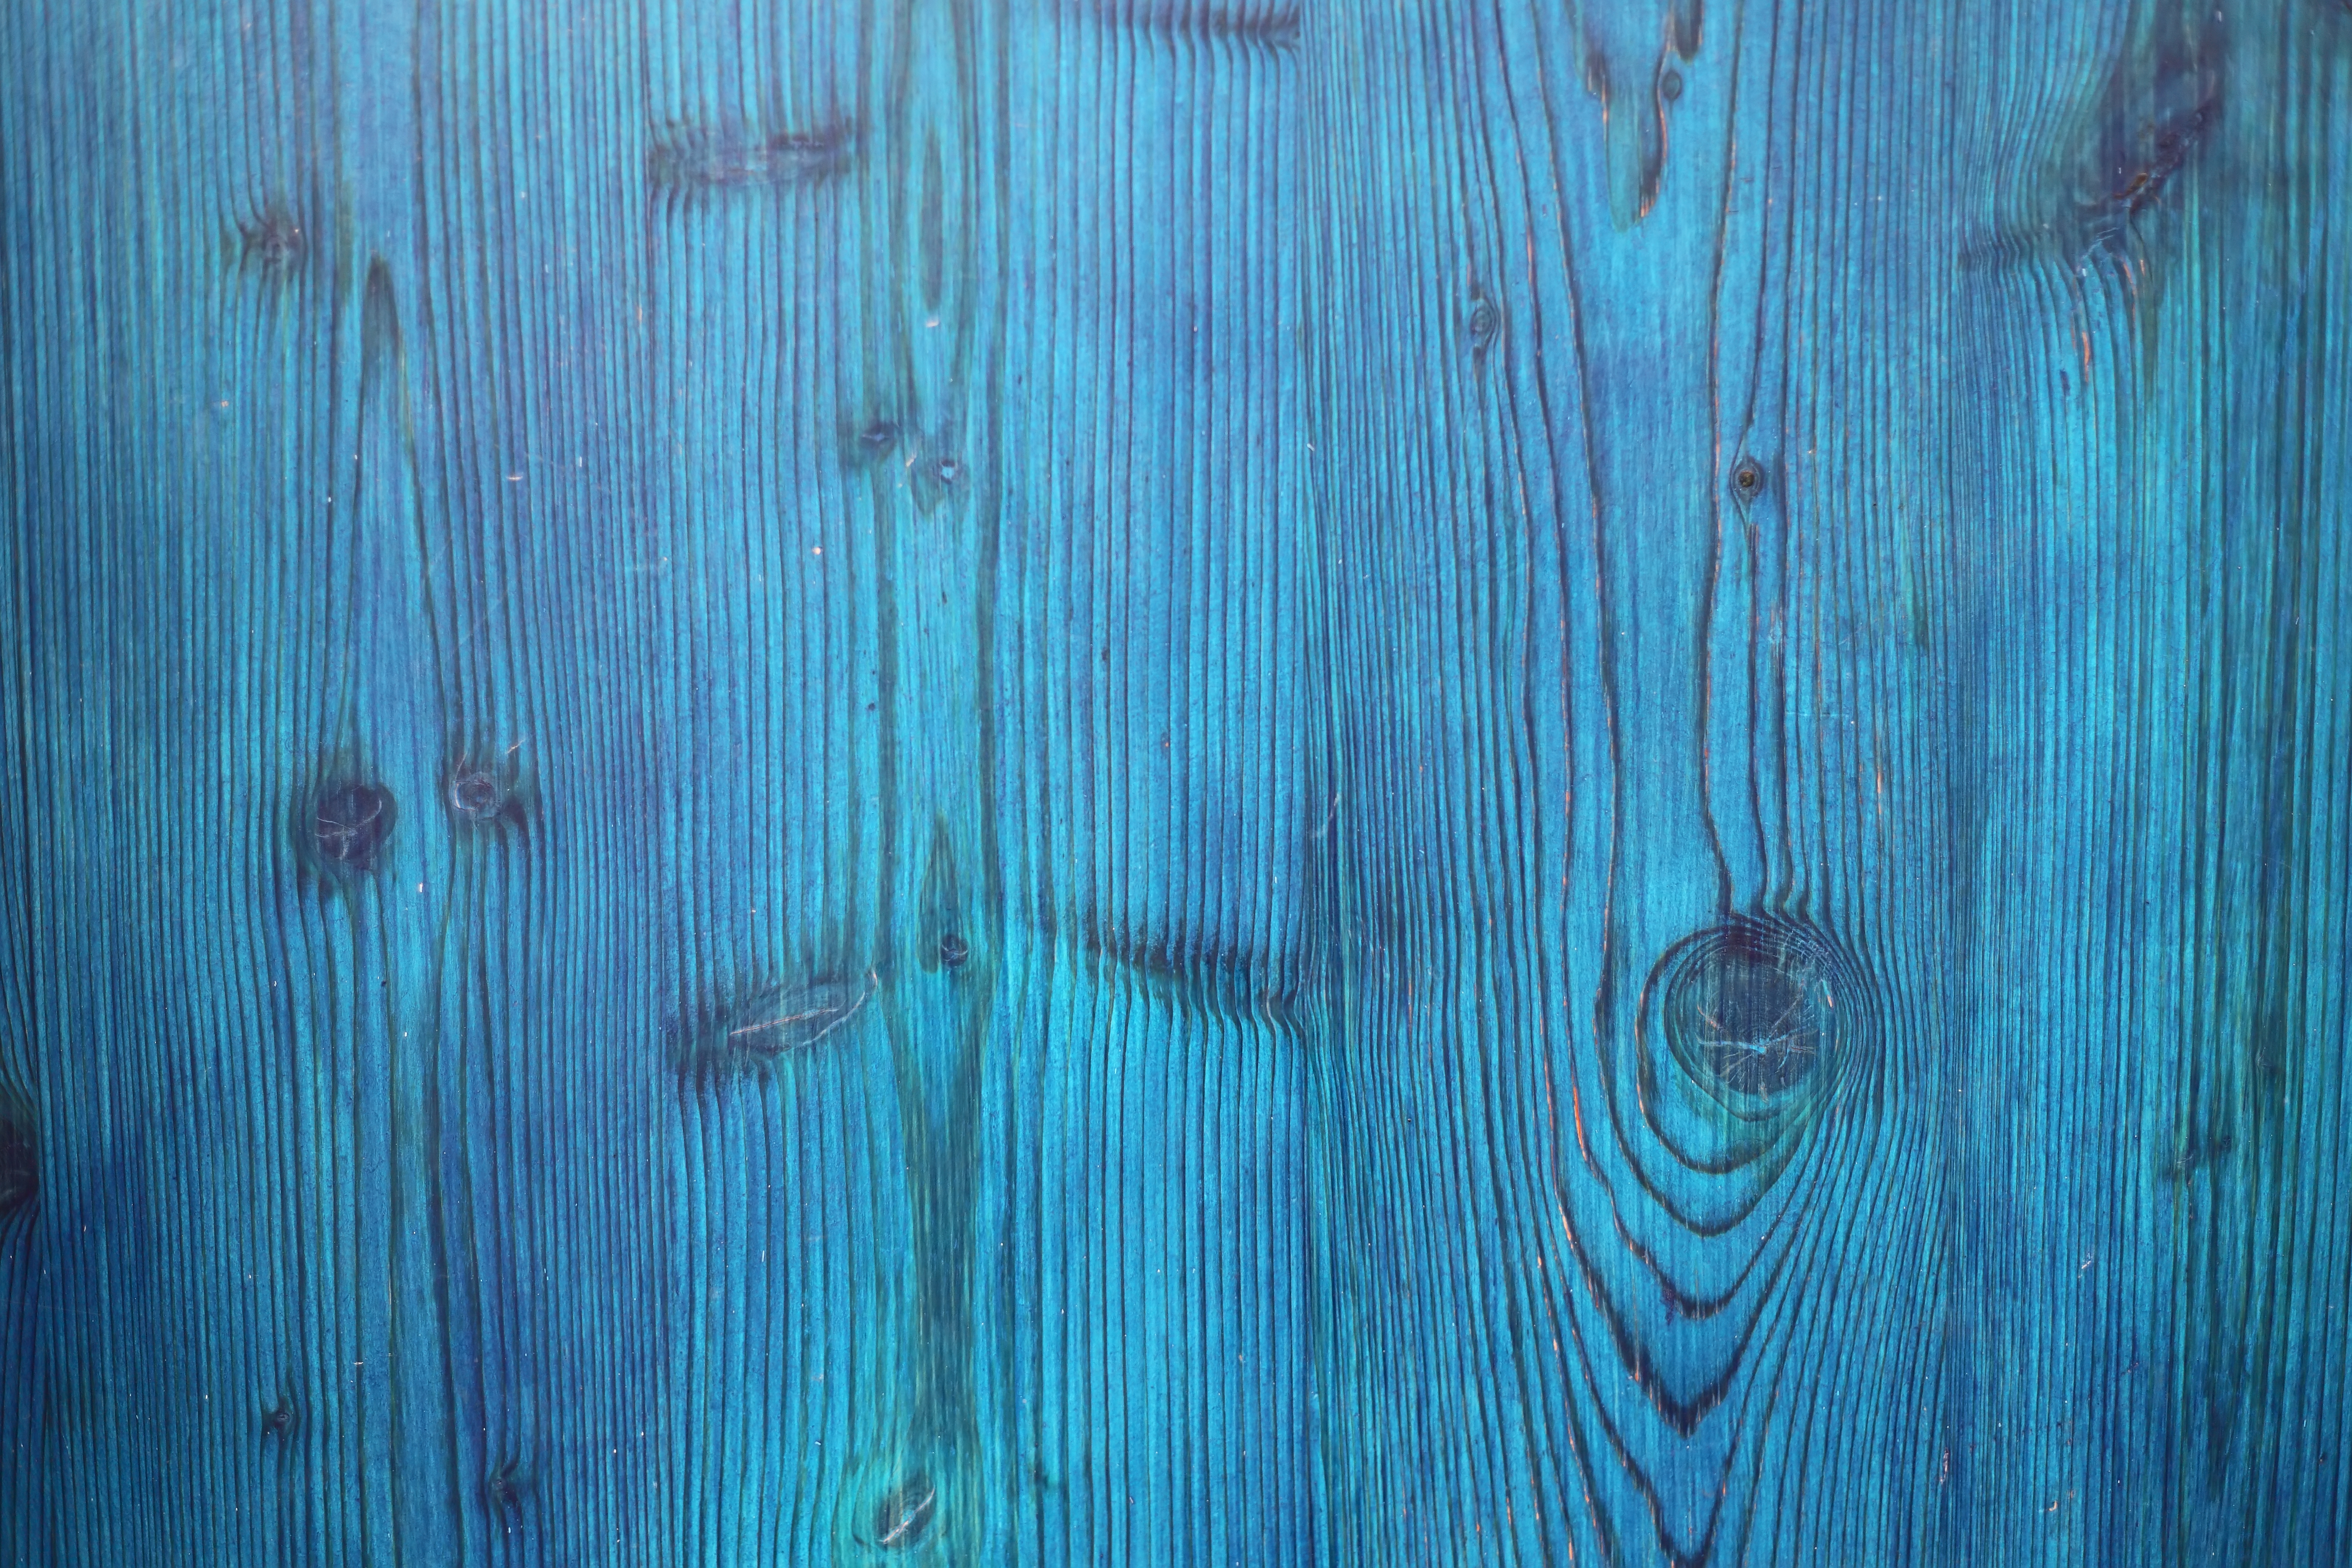 94677 download wallpaper board, blue, wood, wooden, tree, texture, textures, surface, planks screensavers and pictures for free